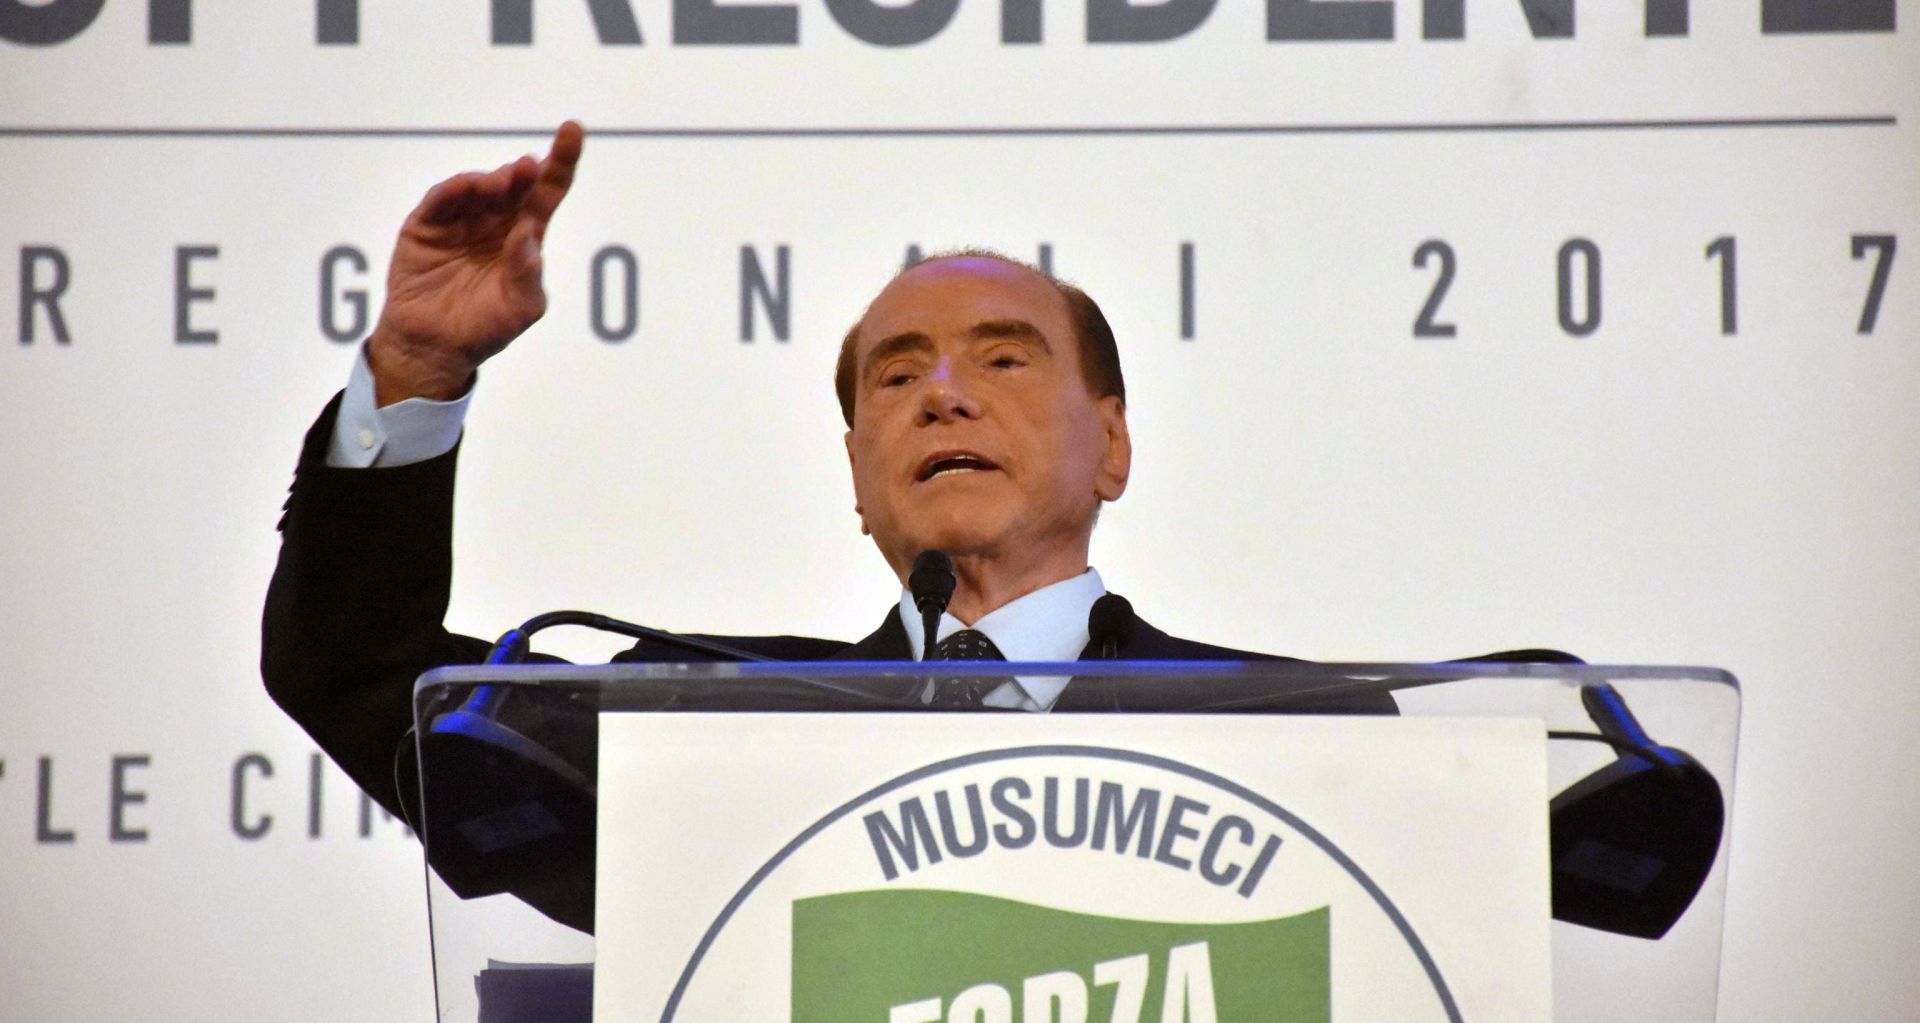 epa06304421 Italian former prime minister and leader of 'Forza Italia' party, Silvio Berlusconi, speaks during an electoral meeting to support the center-right Forza Italia candidate for the presidency of Sicily Region, Nello Musumeci, at the exhibition center 'The smokestacks', in Catania, Italy, 02 November 2017.  EPA/ORIETTA SCARDINO